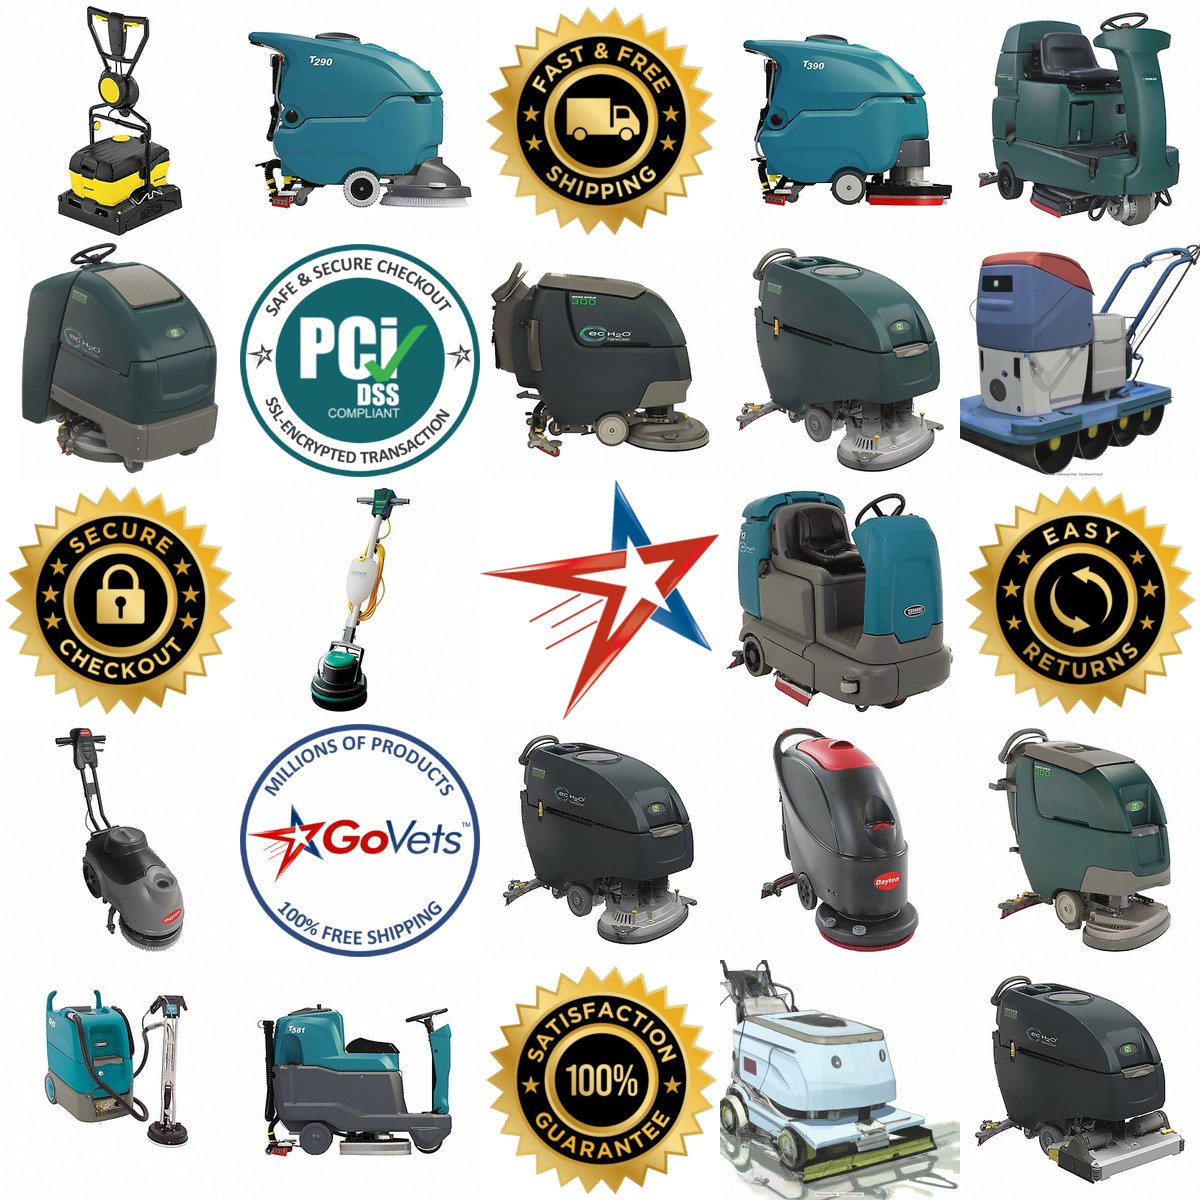 A selection of Self Propelled Floor Scrubbers products on GoVets